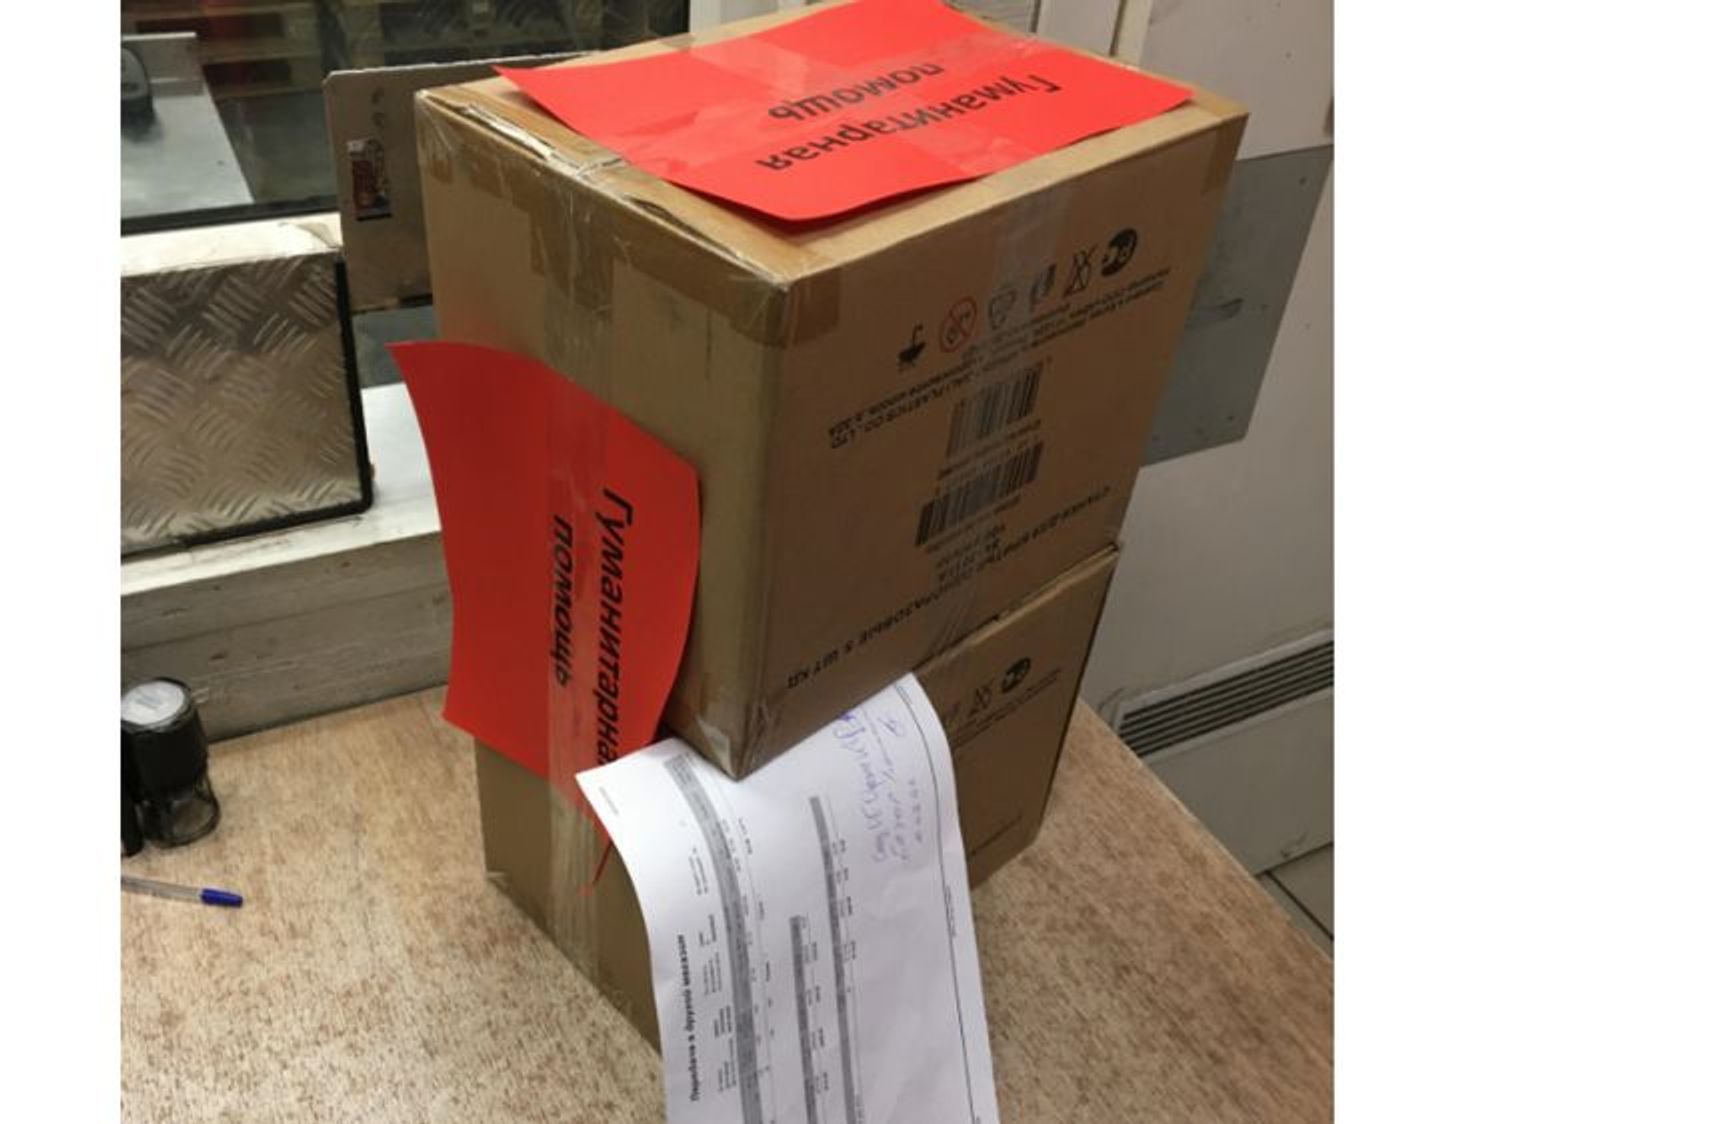 Auchan employees themselves labeled the boxes as "humanitarian aid," even though on paper they were regular sales